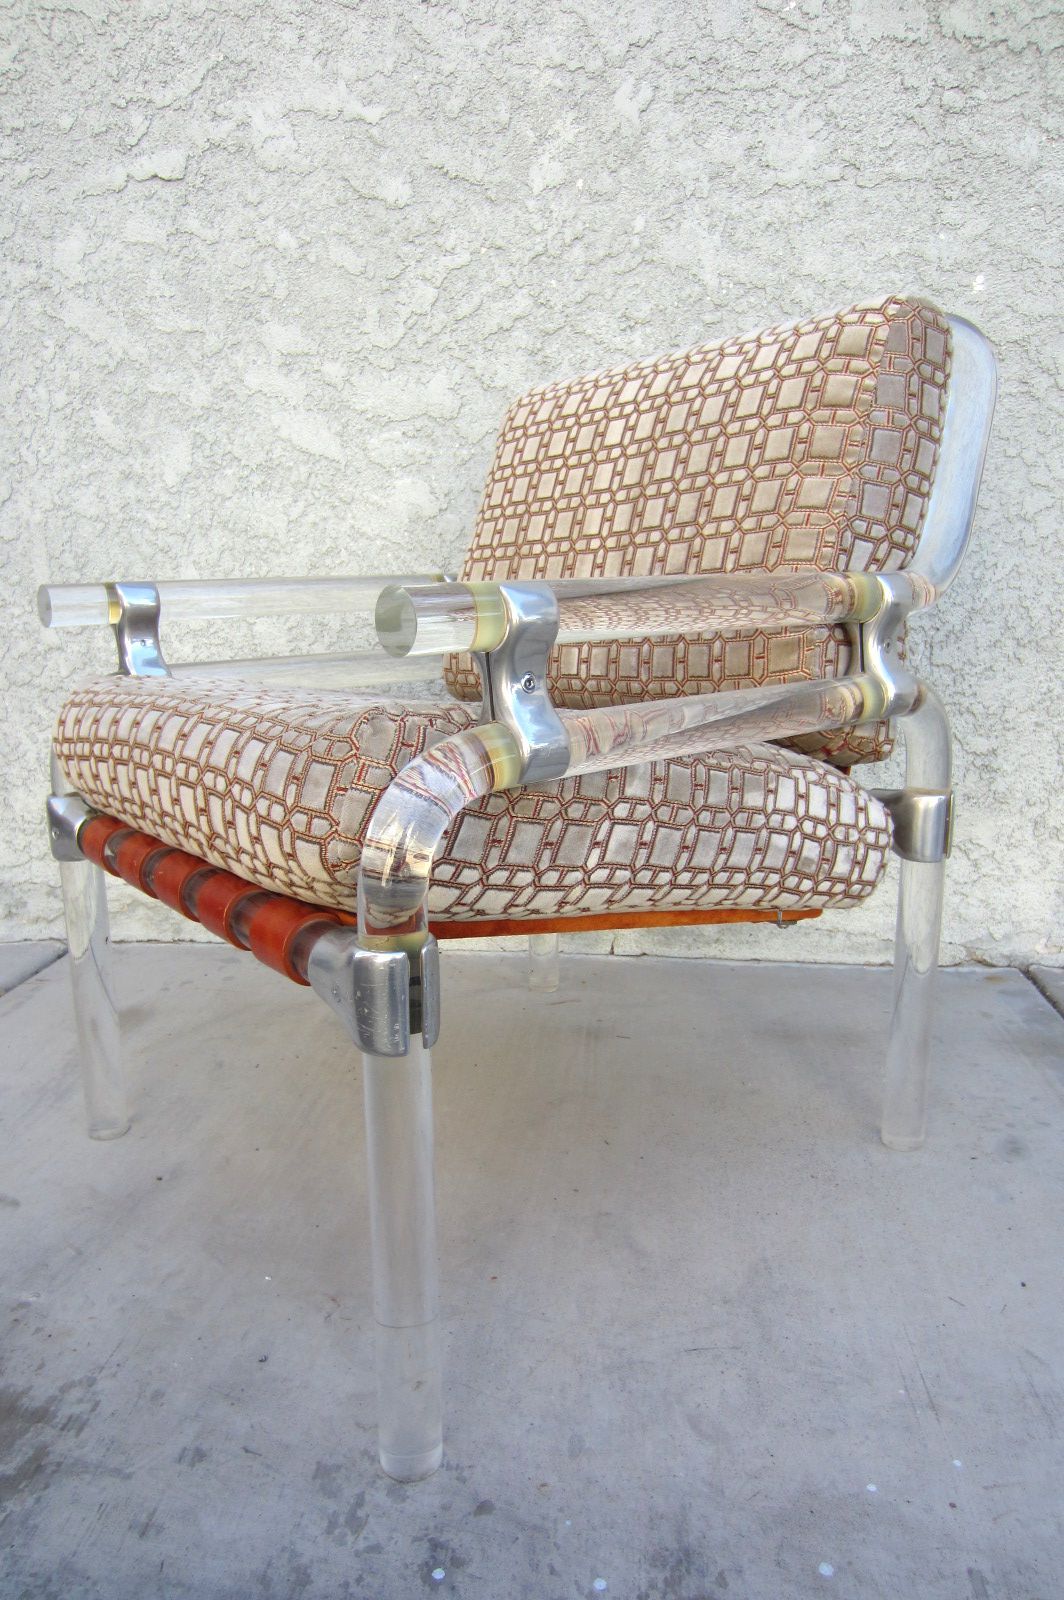 A pair of Pipeline series Lucite lounge chairs by Jeff Messerschmidt, USA, 1970s
Constructed of thick Lucite pipe connected with stainless steel.
Soft brown leather straps and platform hold soft velvet cushions. Very comfortable.
Each is signed and